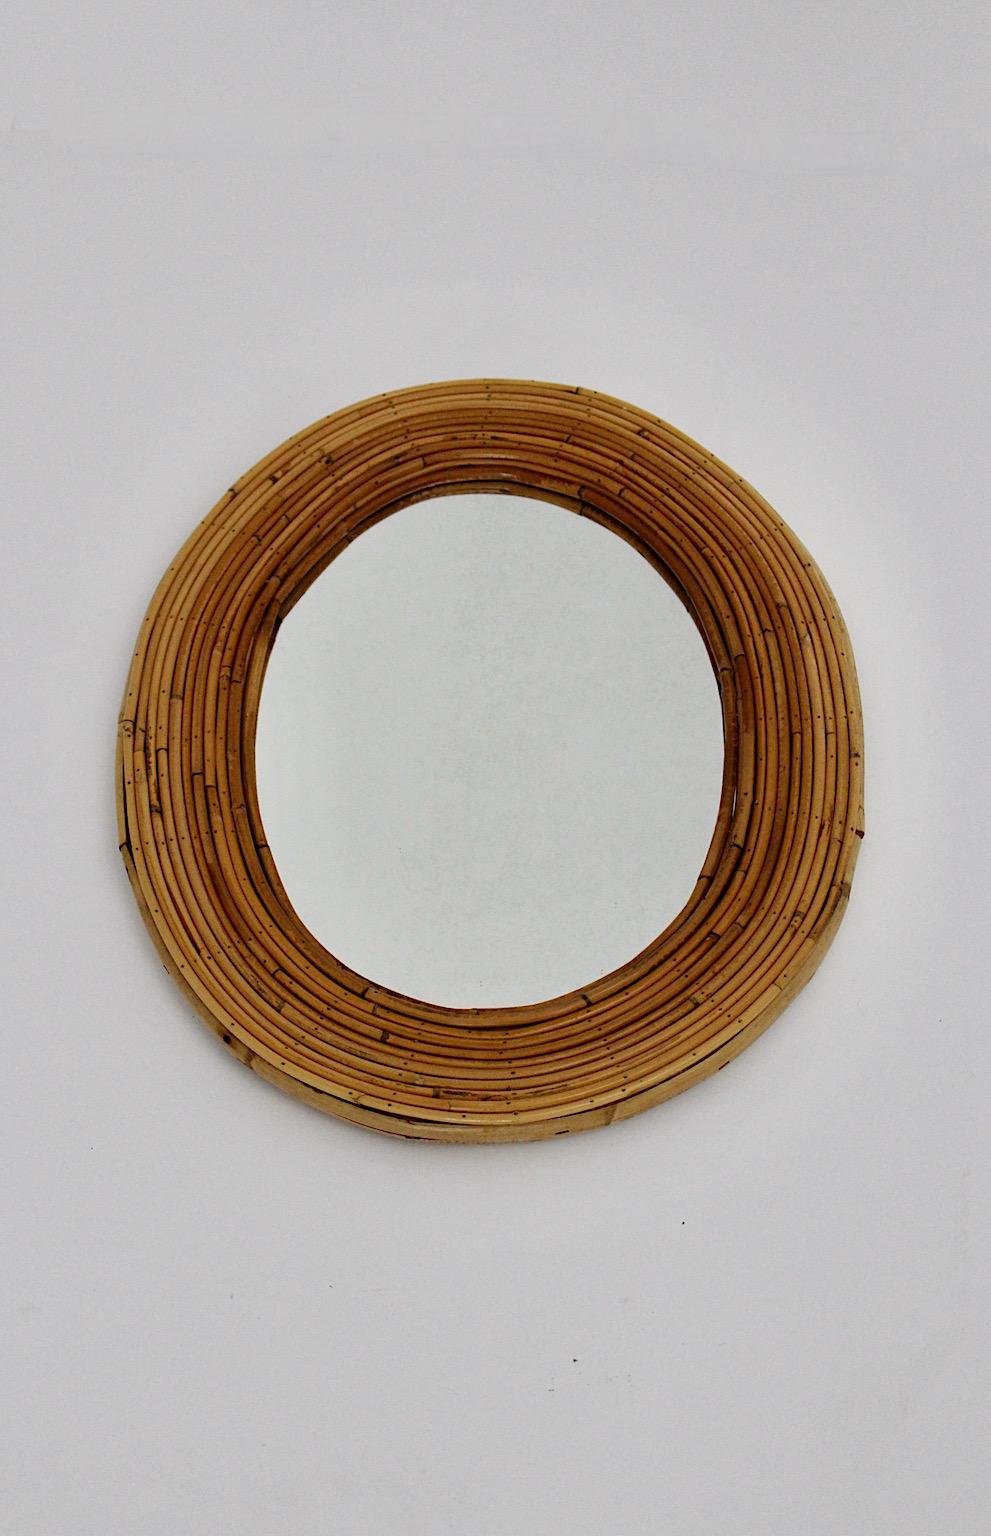 French Riviera Style Organic Vintage Rattan Bamboo Oval Wall Mirror France, 1950s